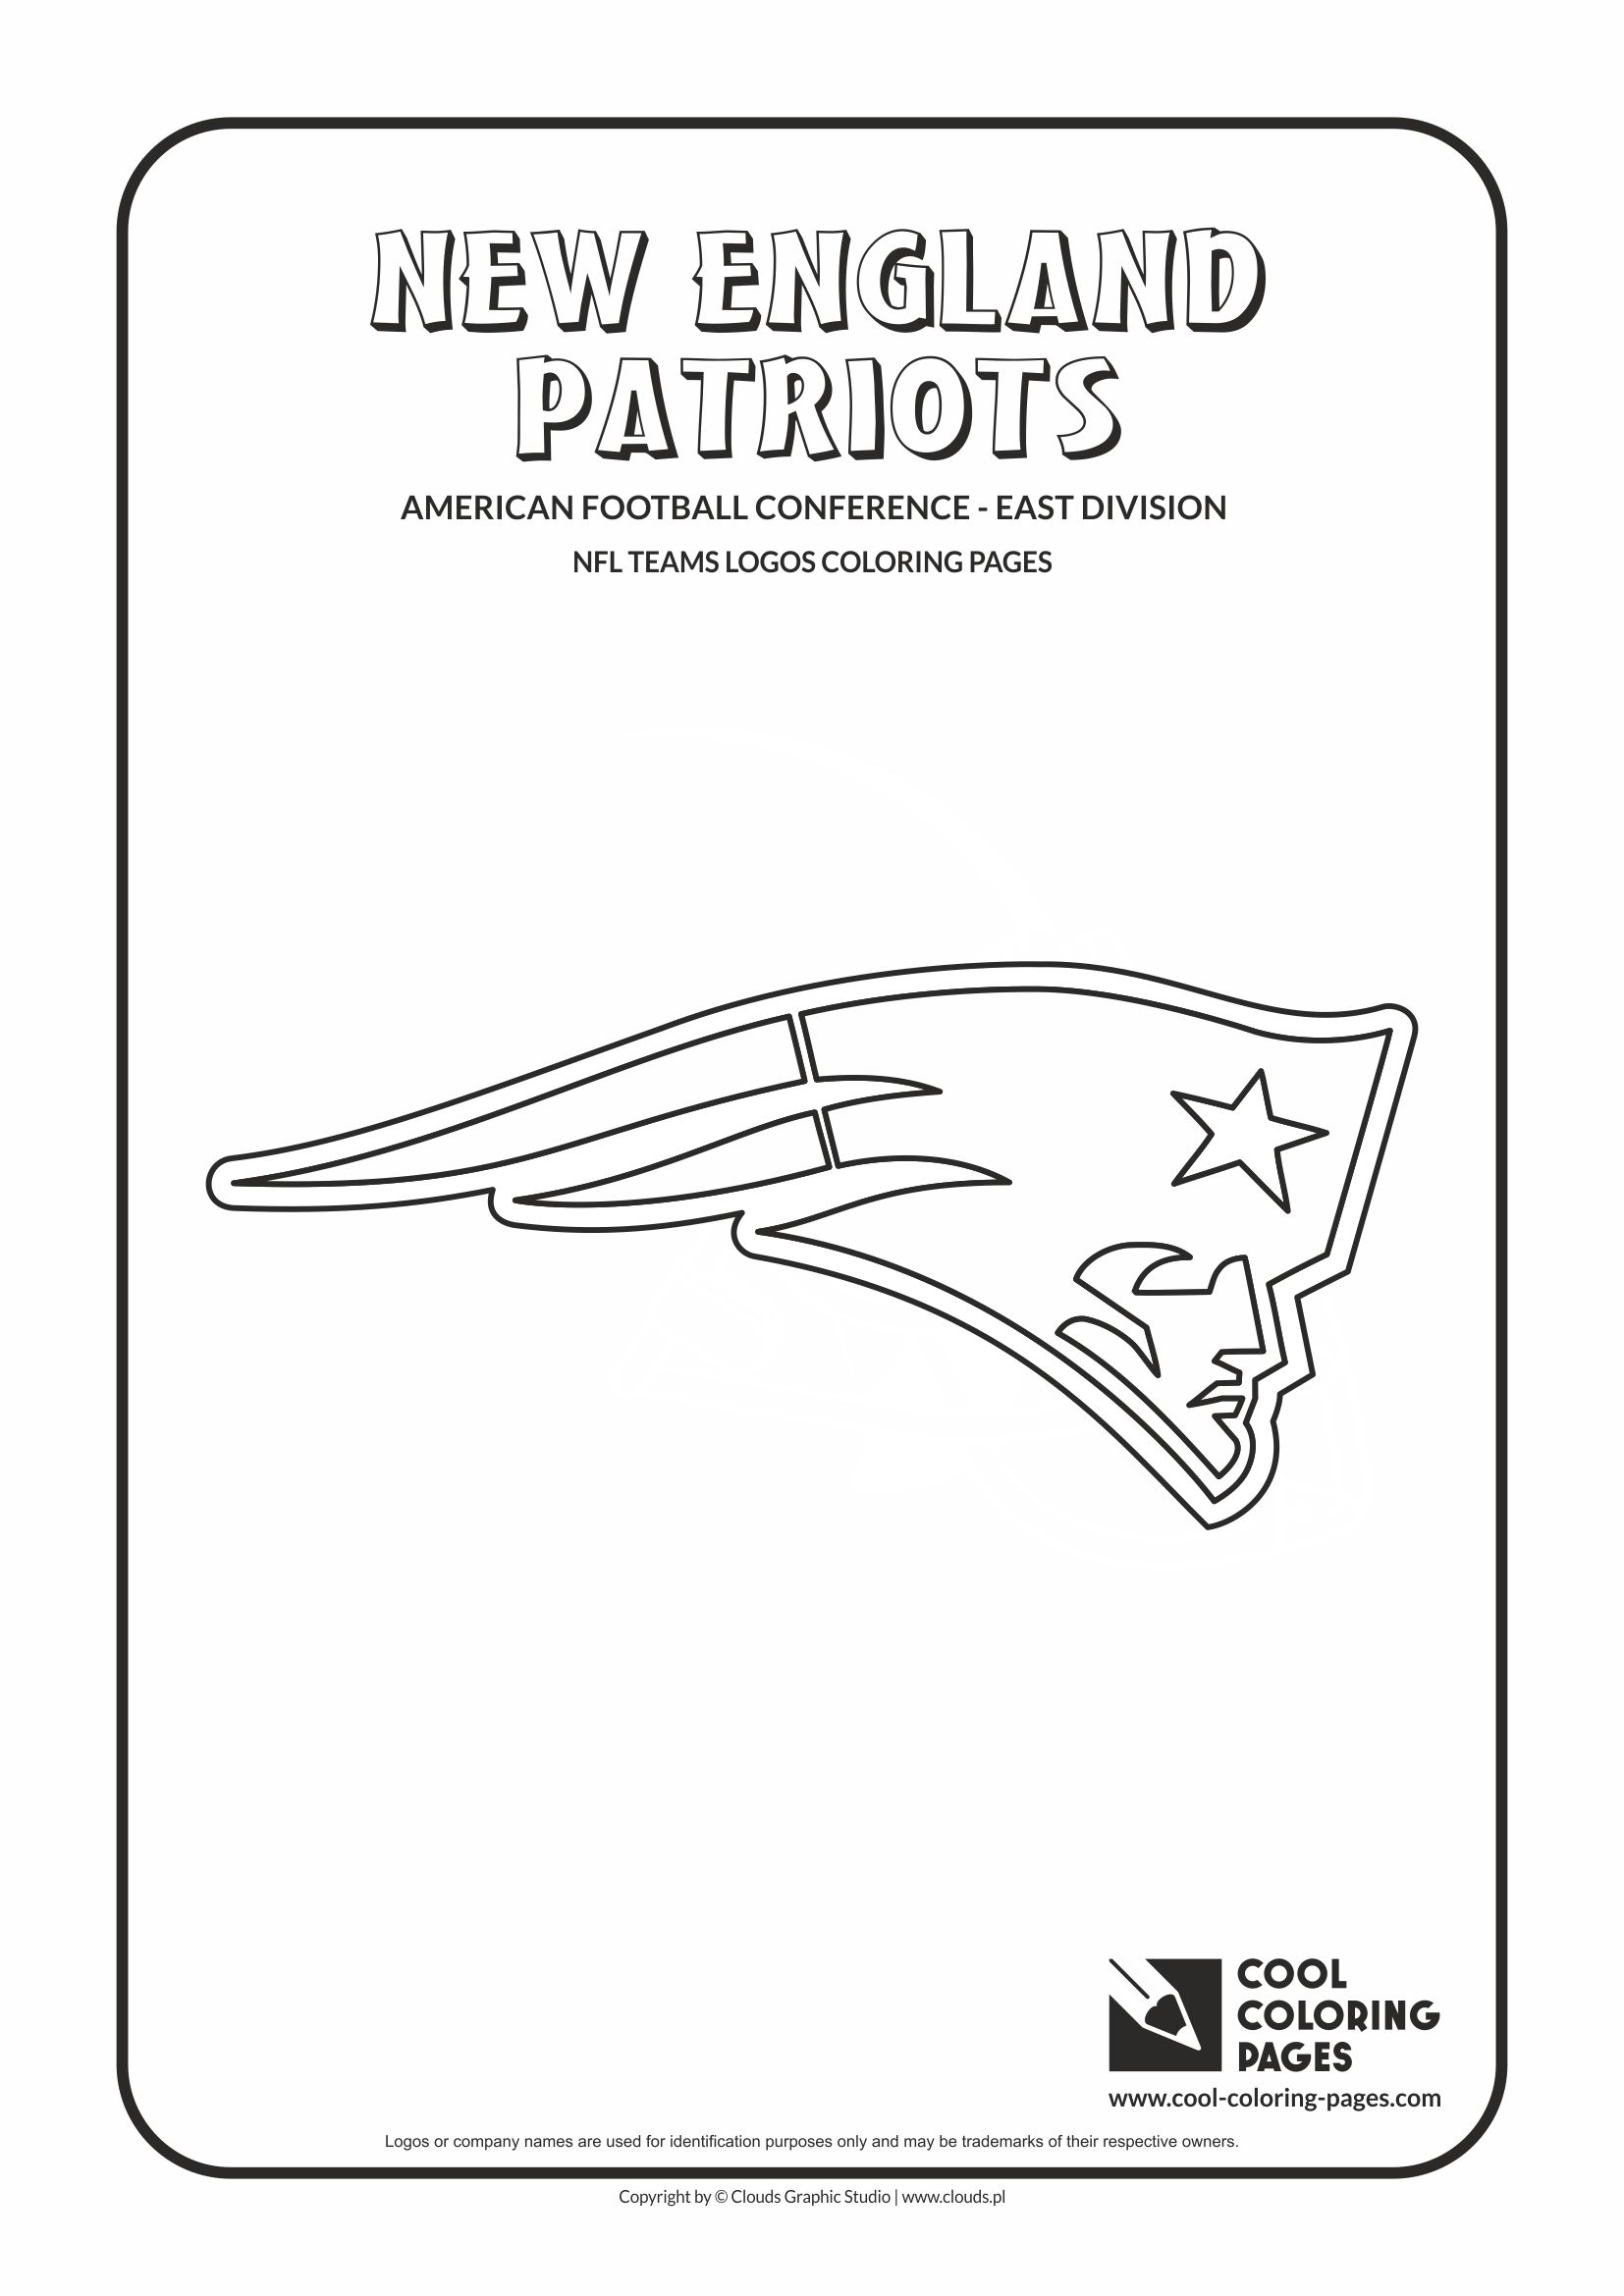 Cool Coloring Pages NFL teams logos coloring pages - Cool Coloring ...